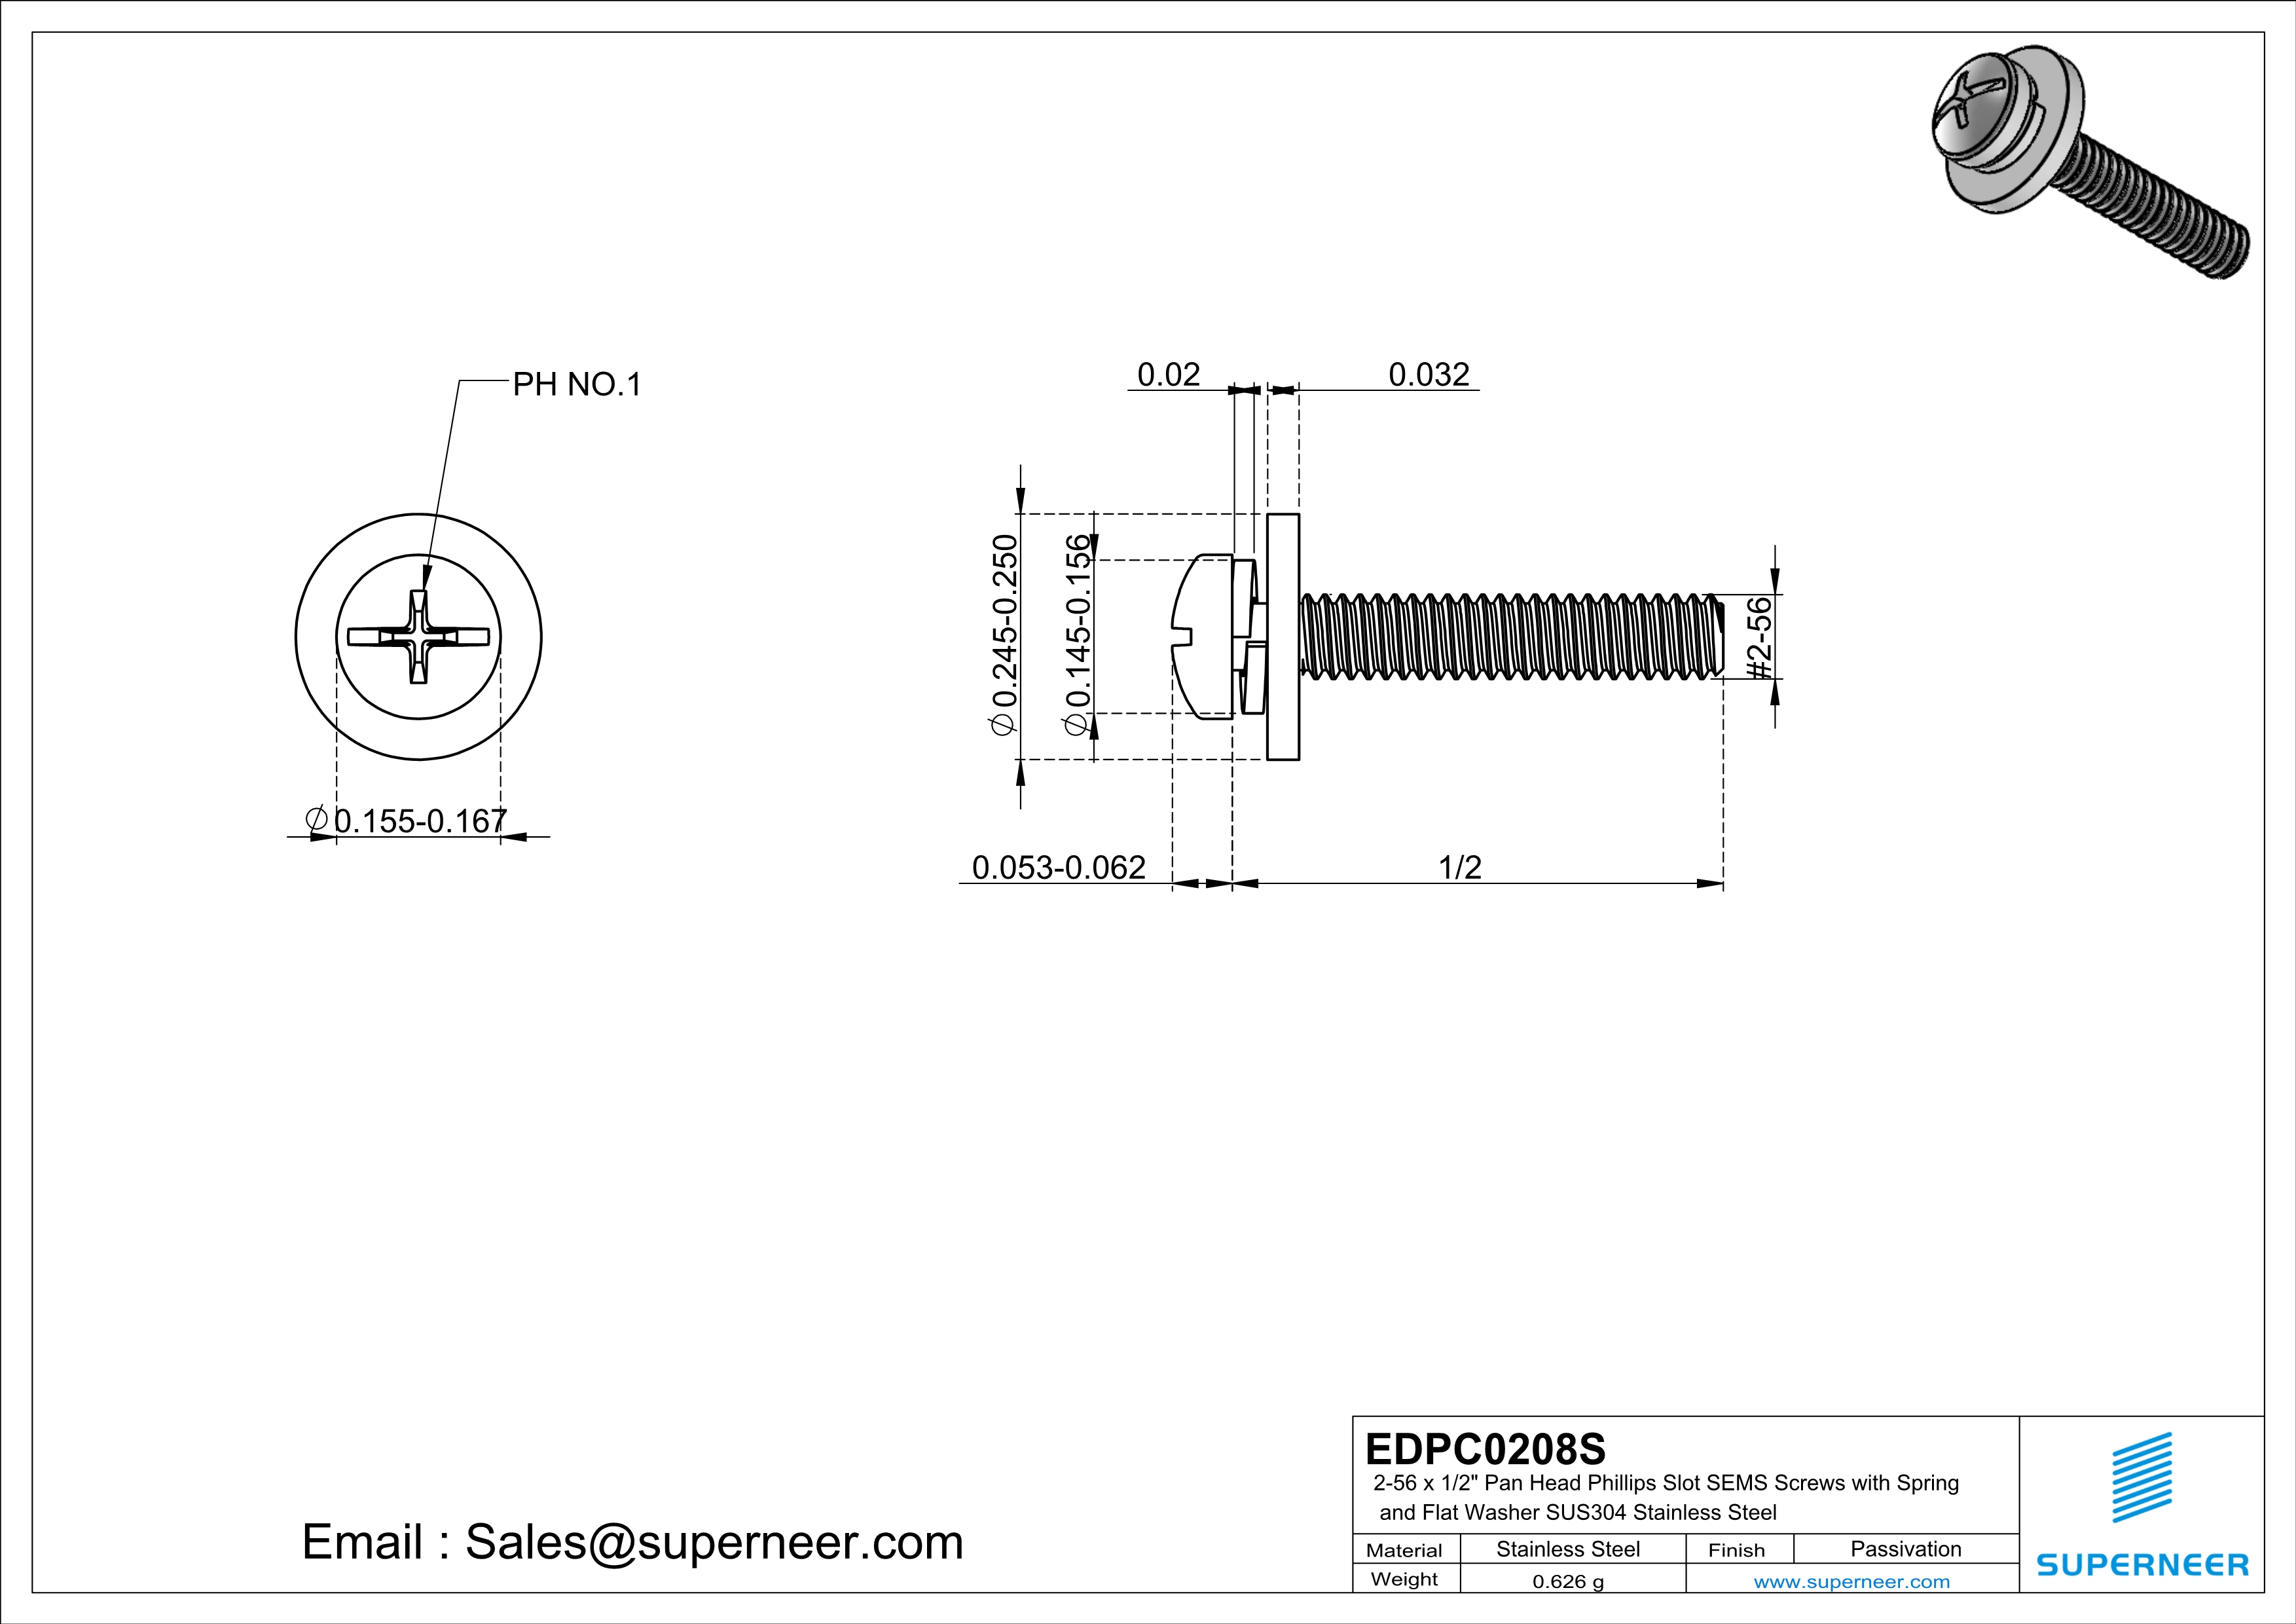 2-56 x 1/2" Pan Head Phillips Slot SEMS Screws with Spring and Flat Washer SUS304 Stainless Steel Inox